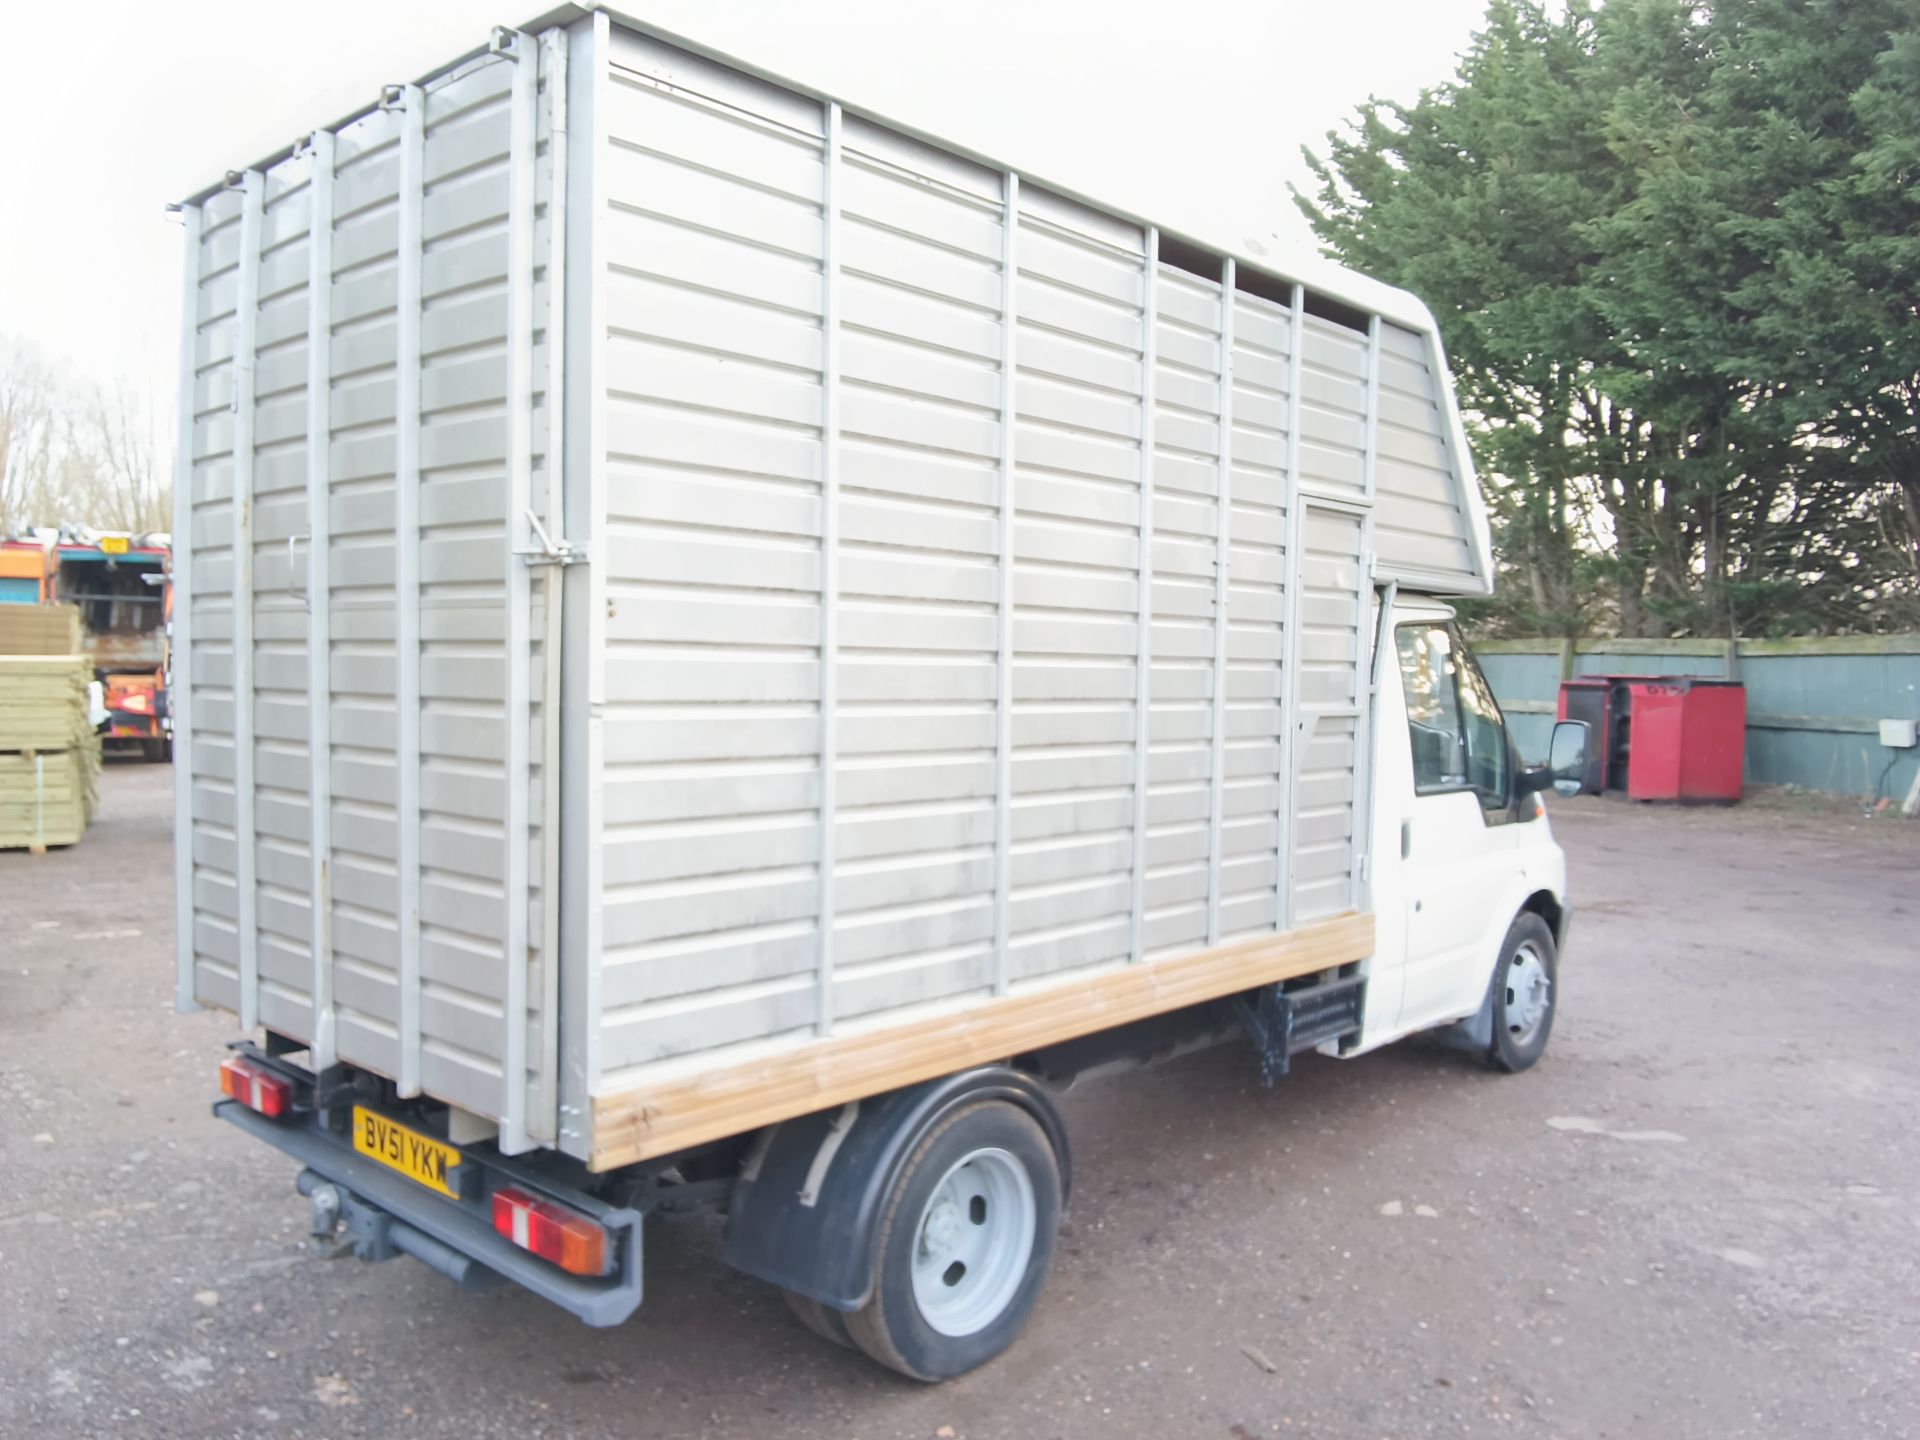 FORD TRANSIT TWIN WHEEL HORSE BOX REG: MOT UNTIL 23/11/24 WITH COPY OF V5. PREVIOUS INSURANCE - Image 6 of 9